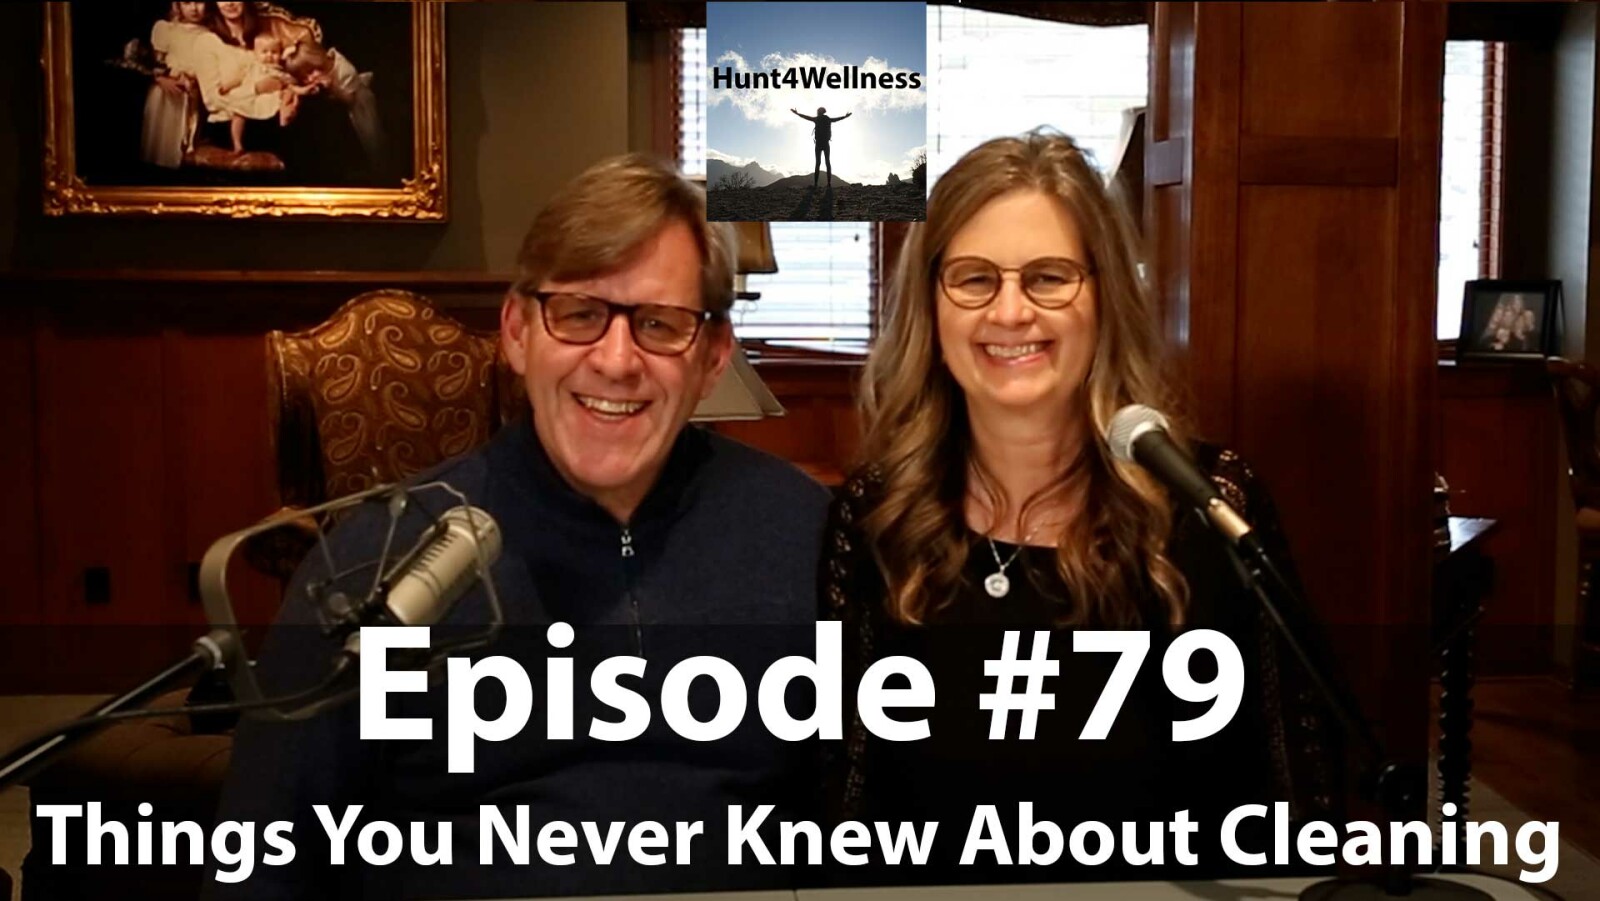 Episode #79 - Things You Never Knew About Cleaning